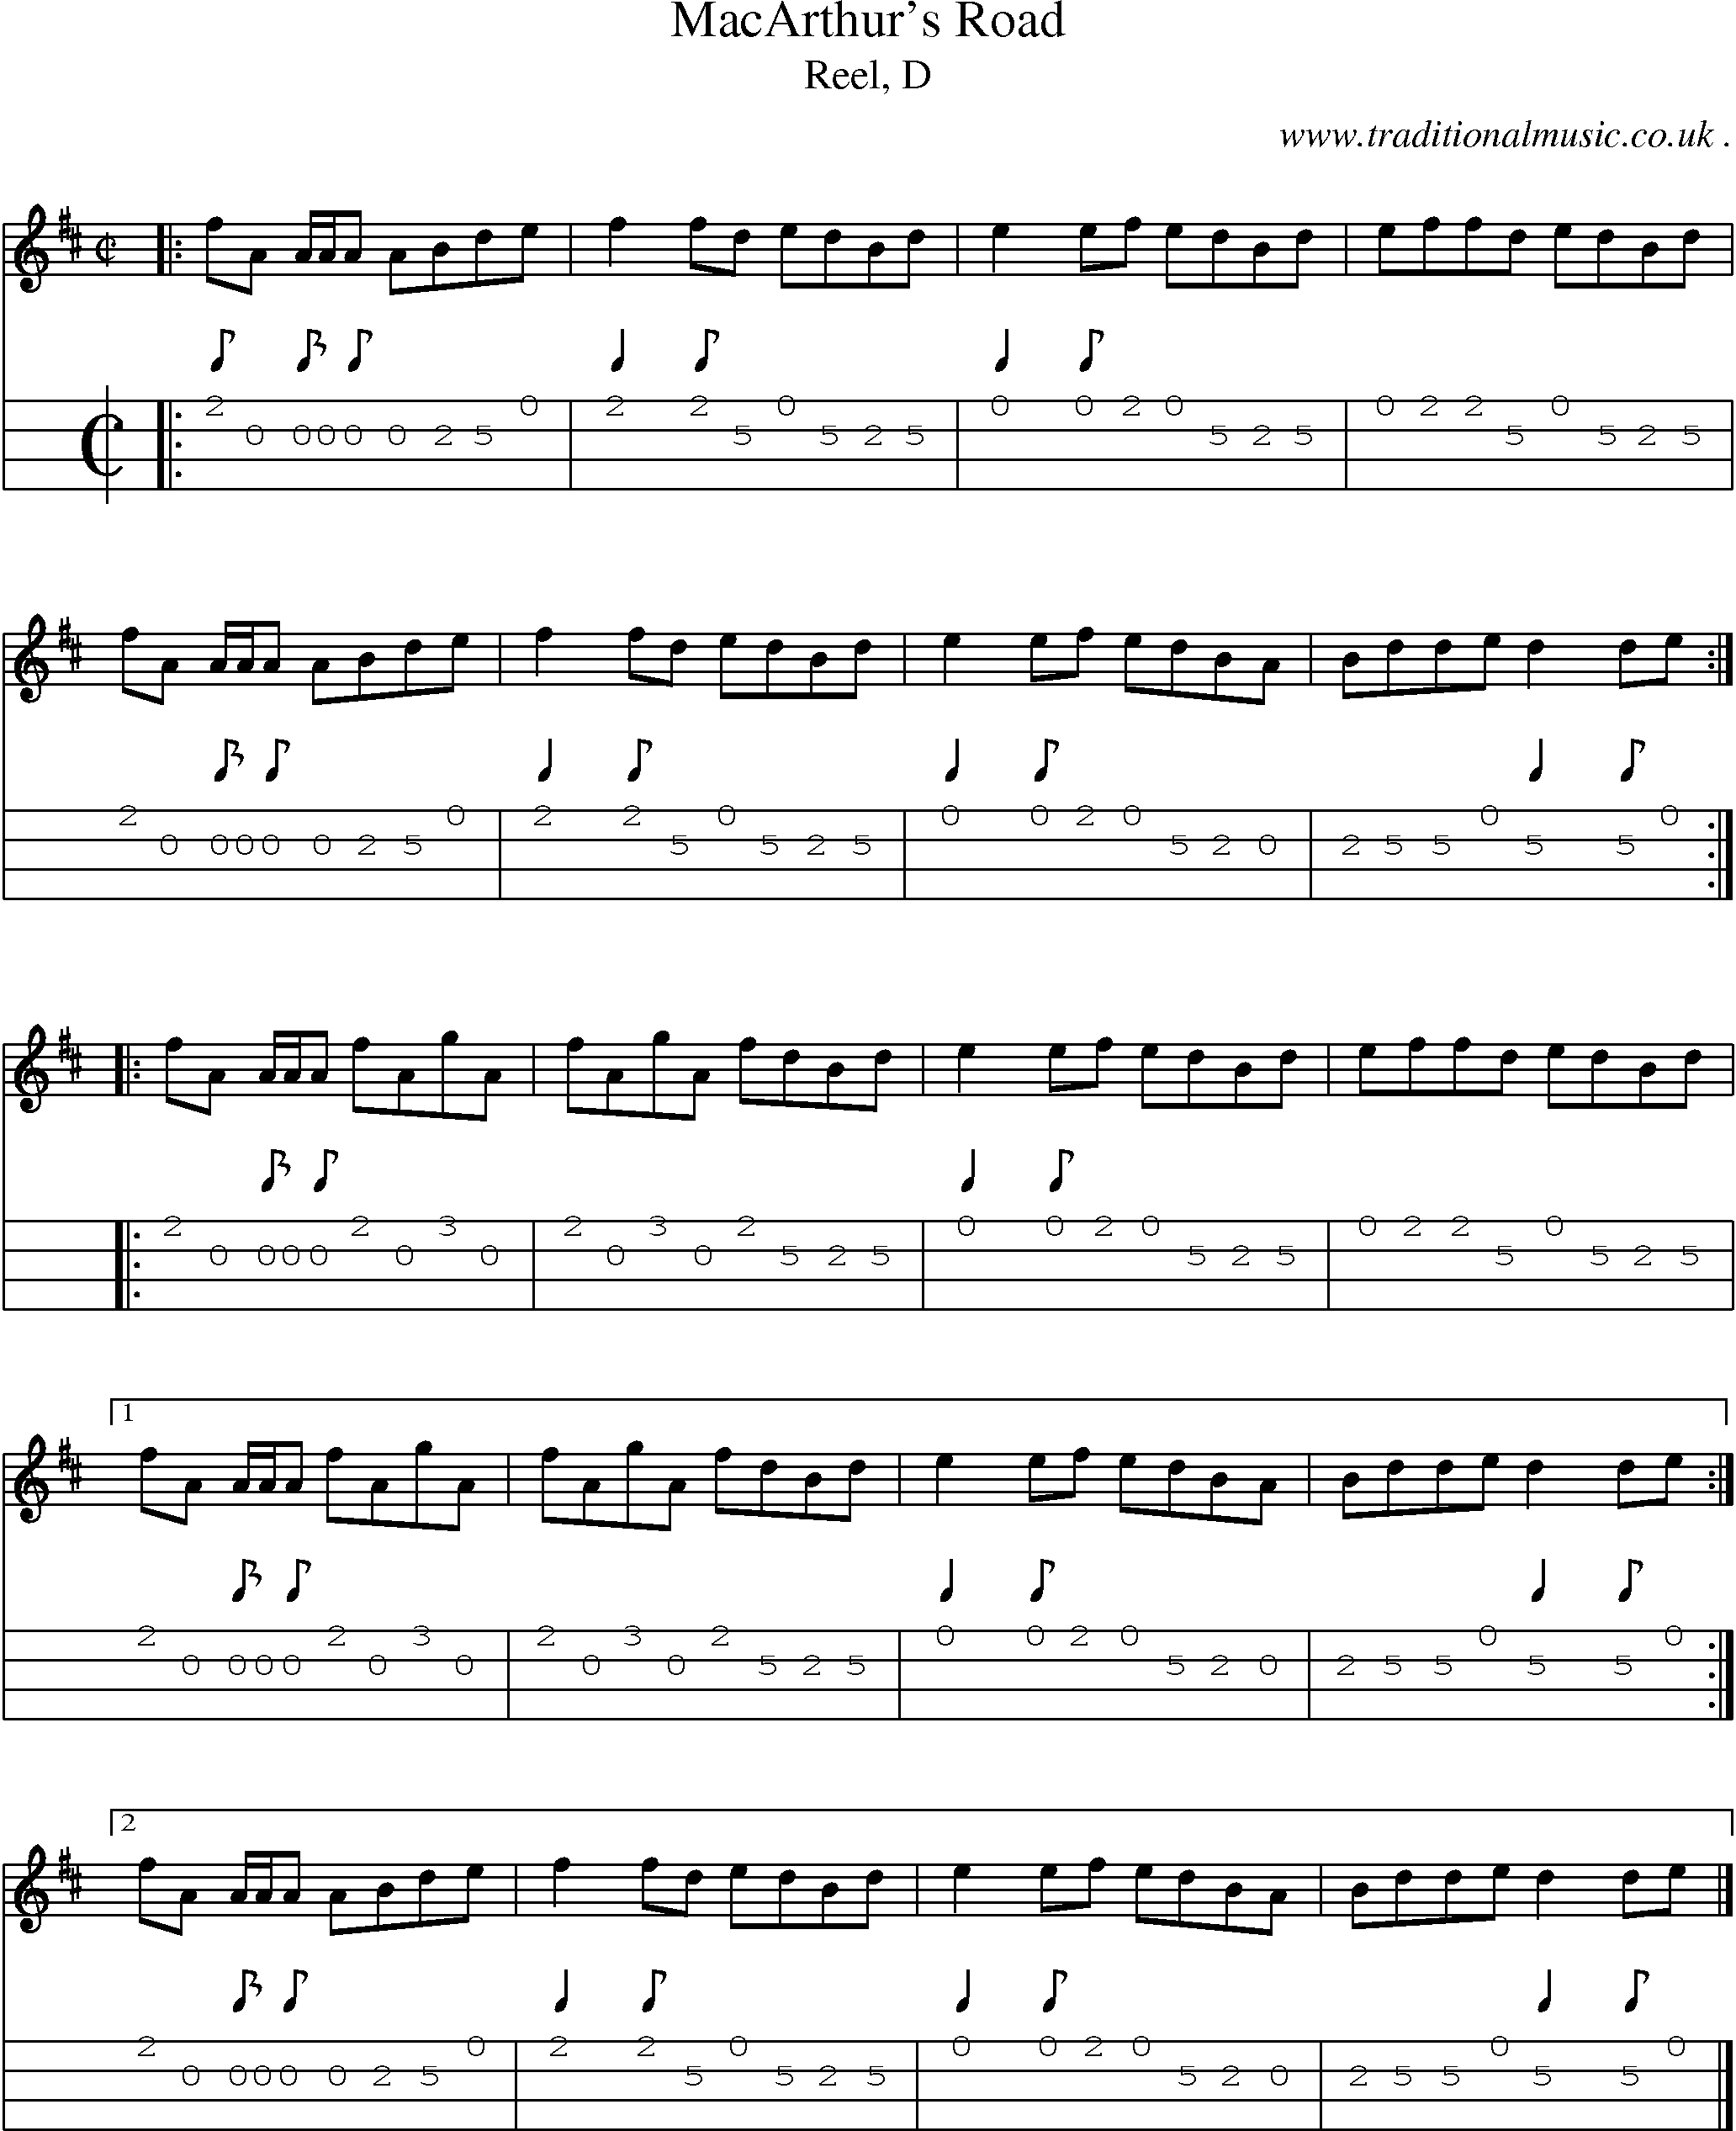 Sheet-music  score, Chords and Mandolin Tabs for Macarthurs Road